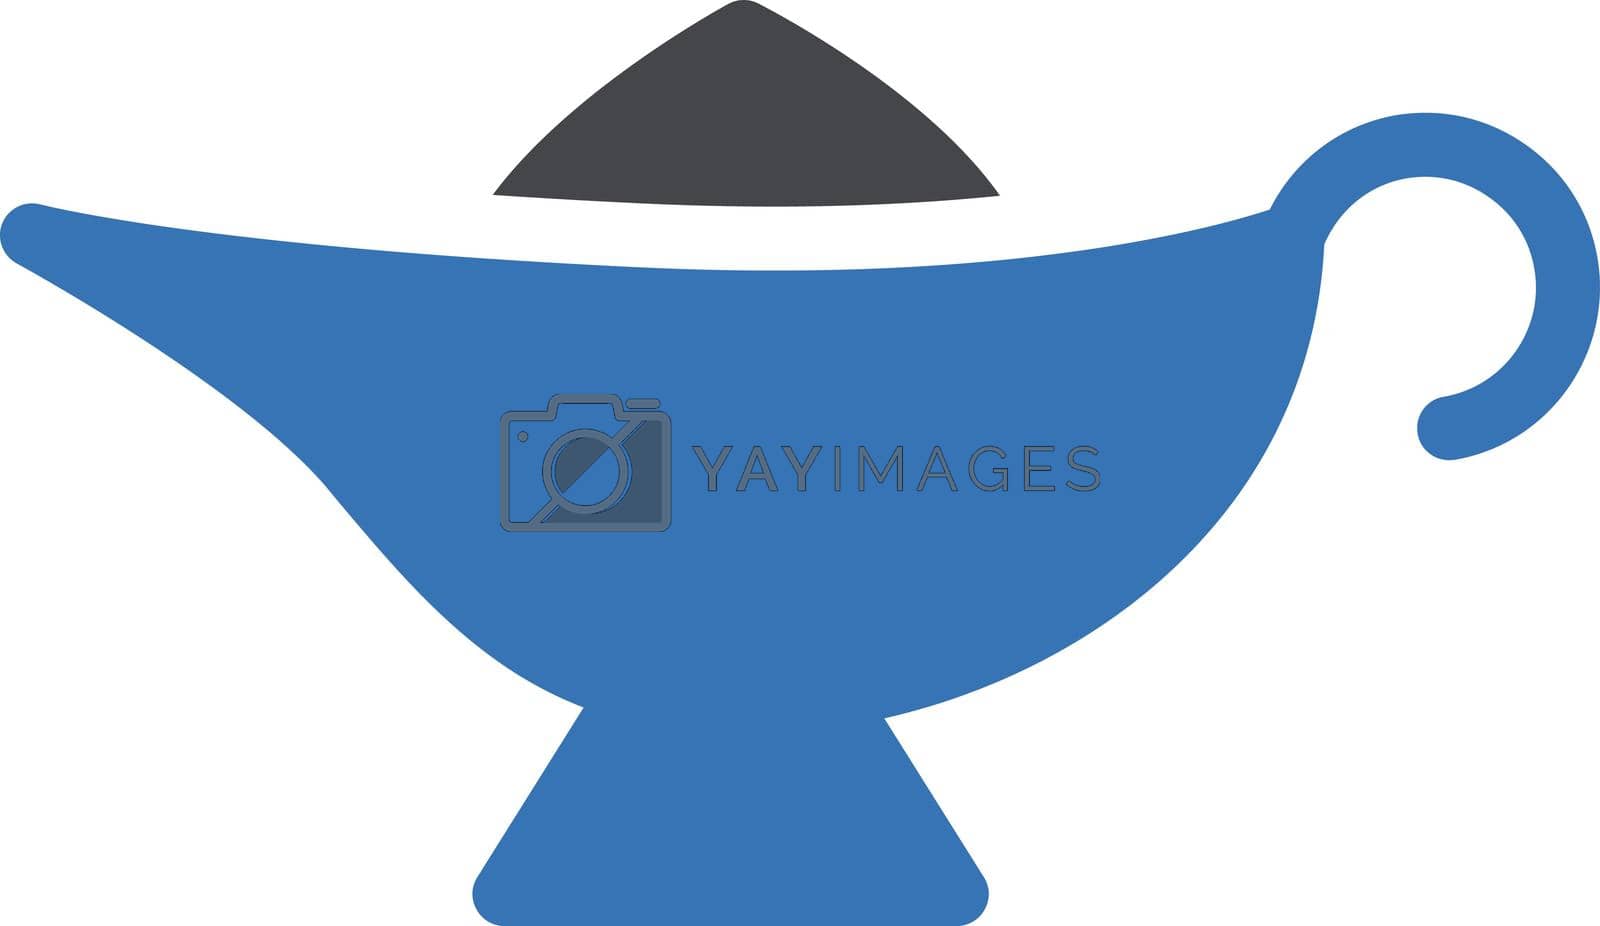 Royalty free image of lamp by vectorstall